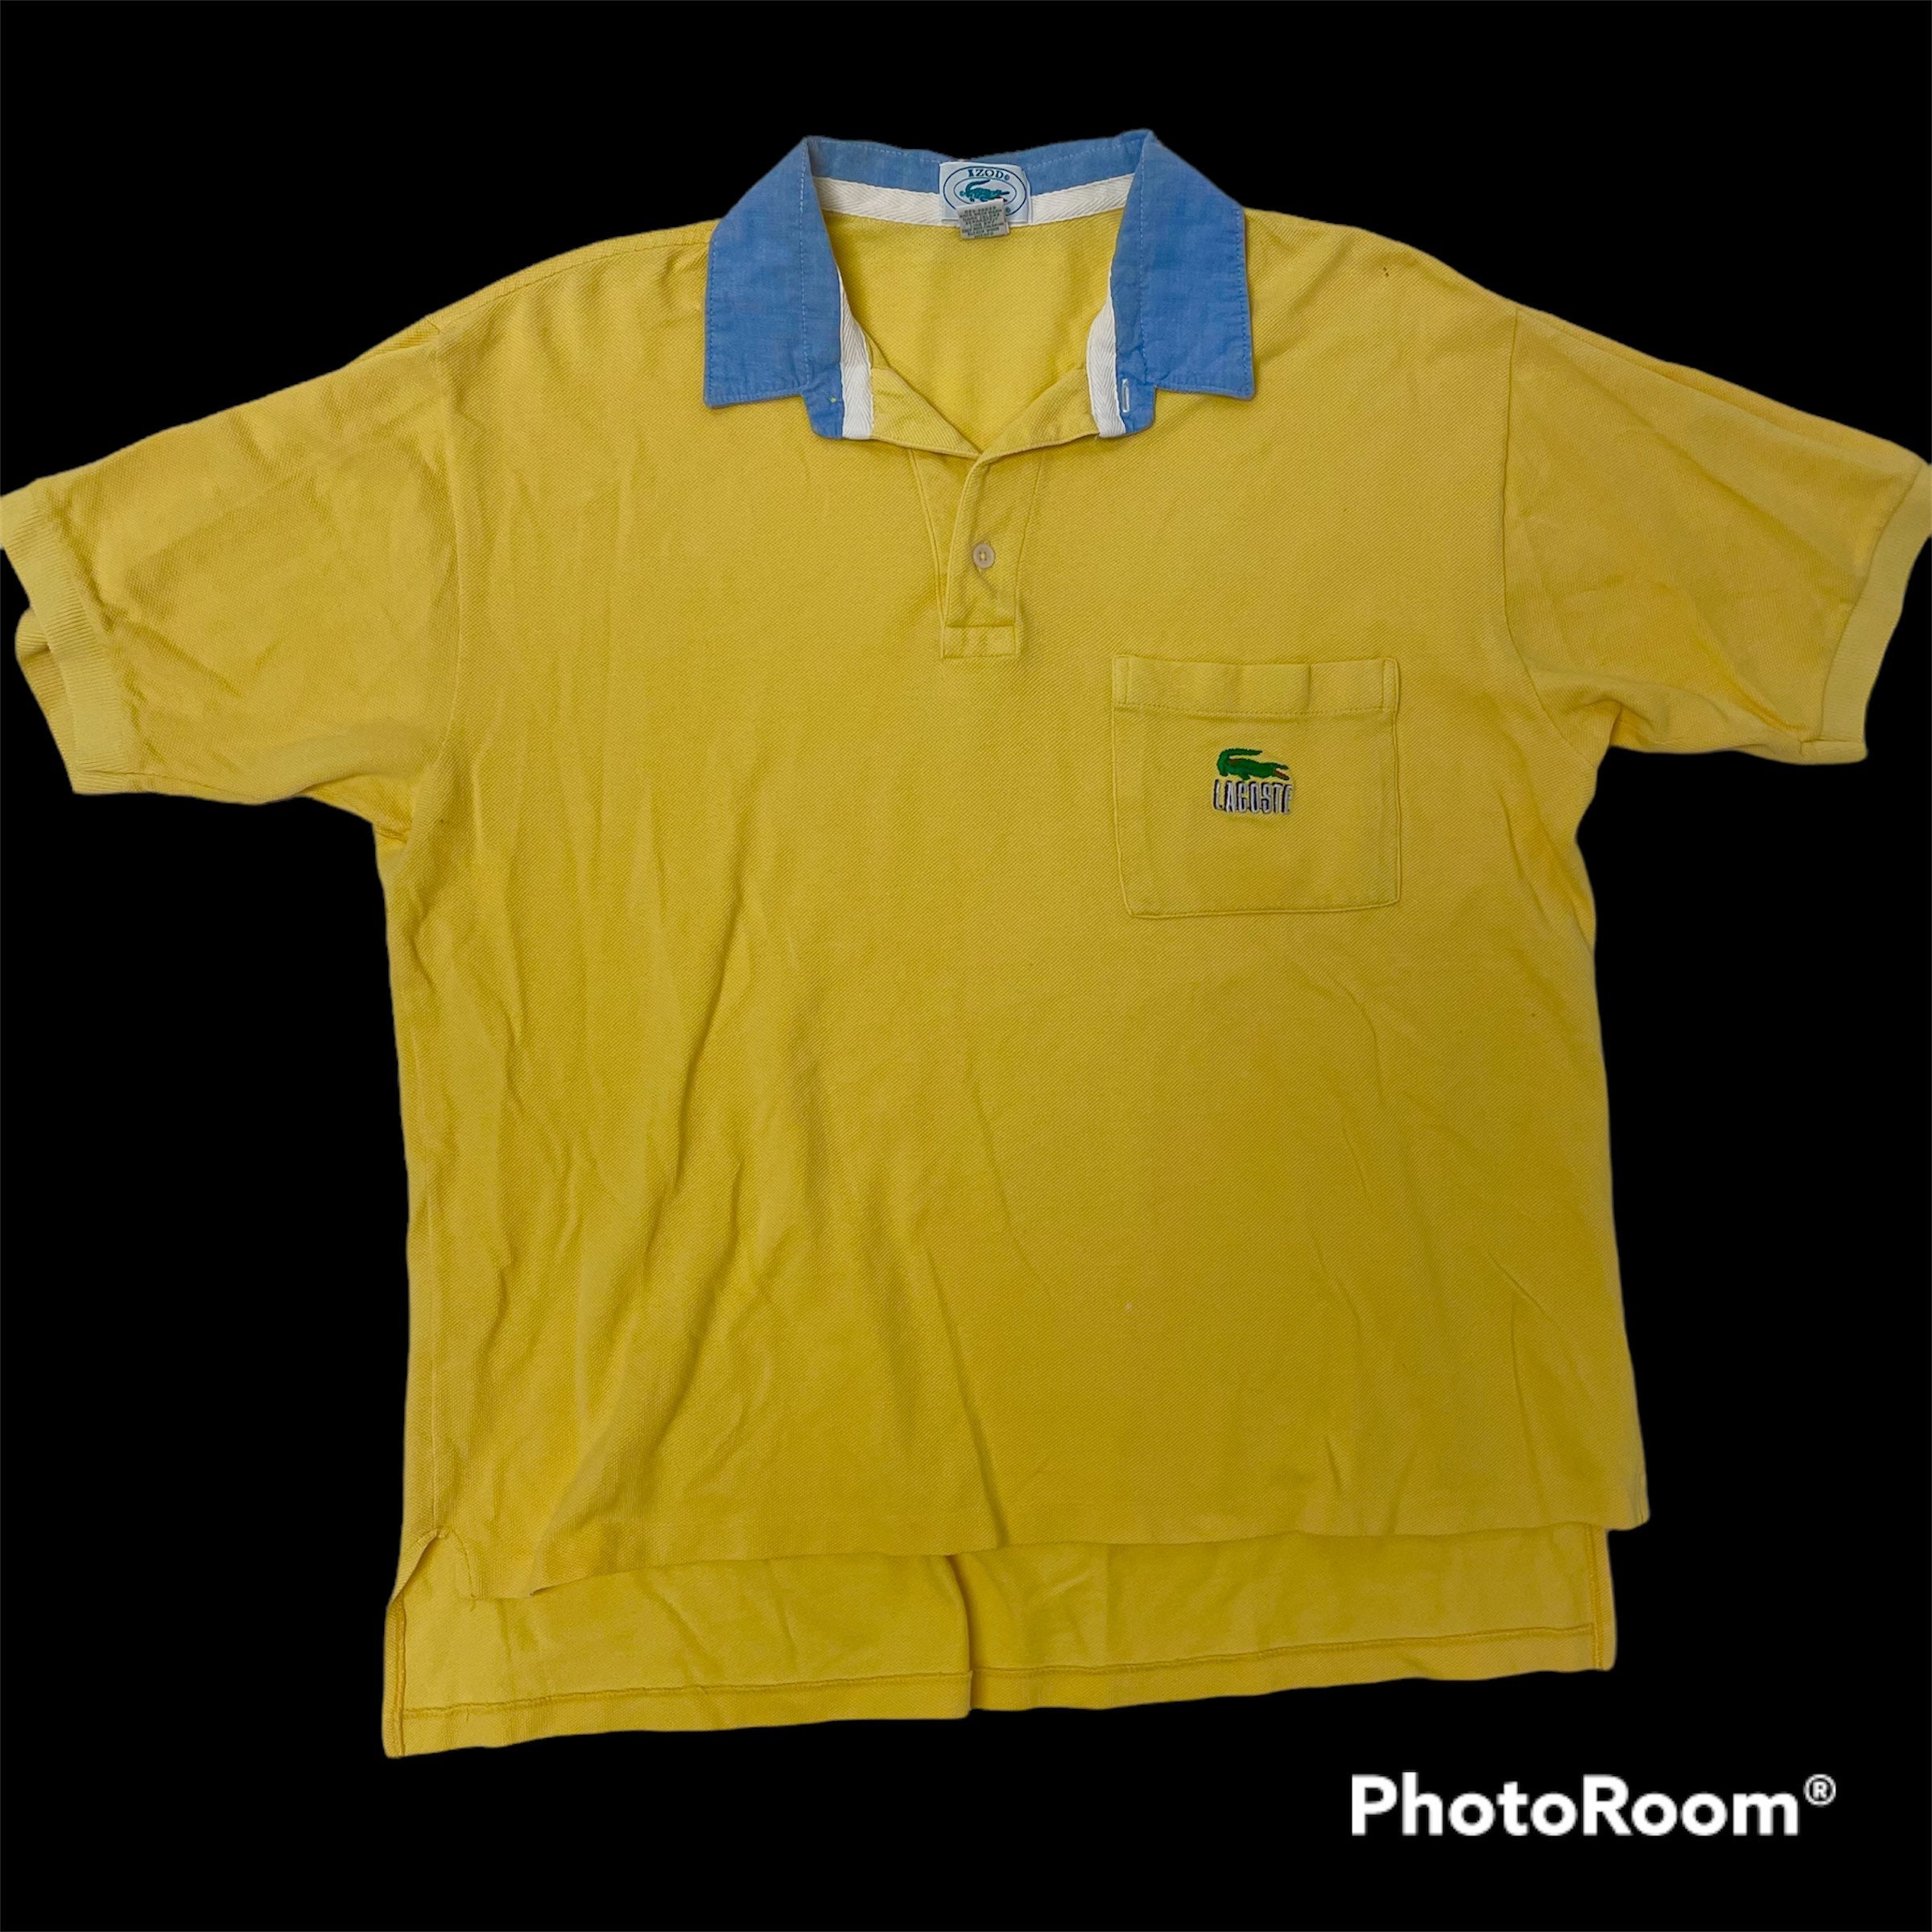 Vintage 80's Lacoste Yellow SPELLOUT - Etsy